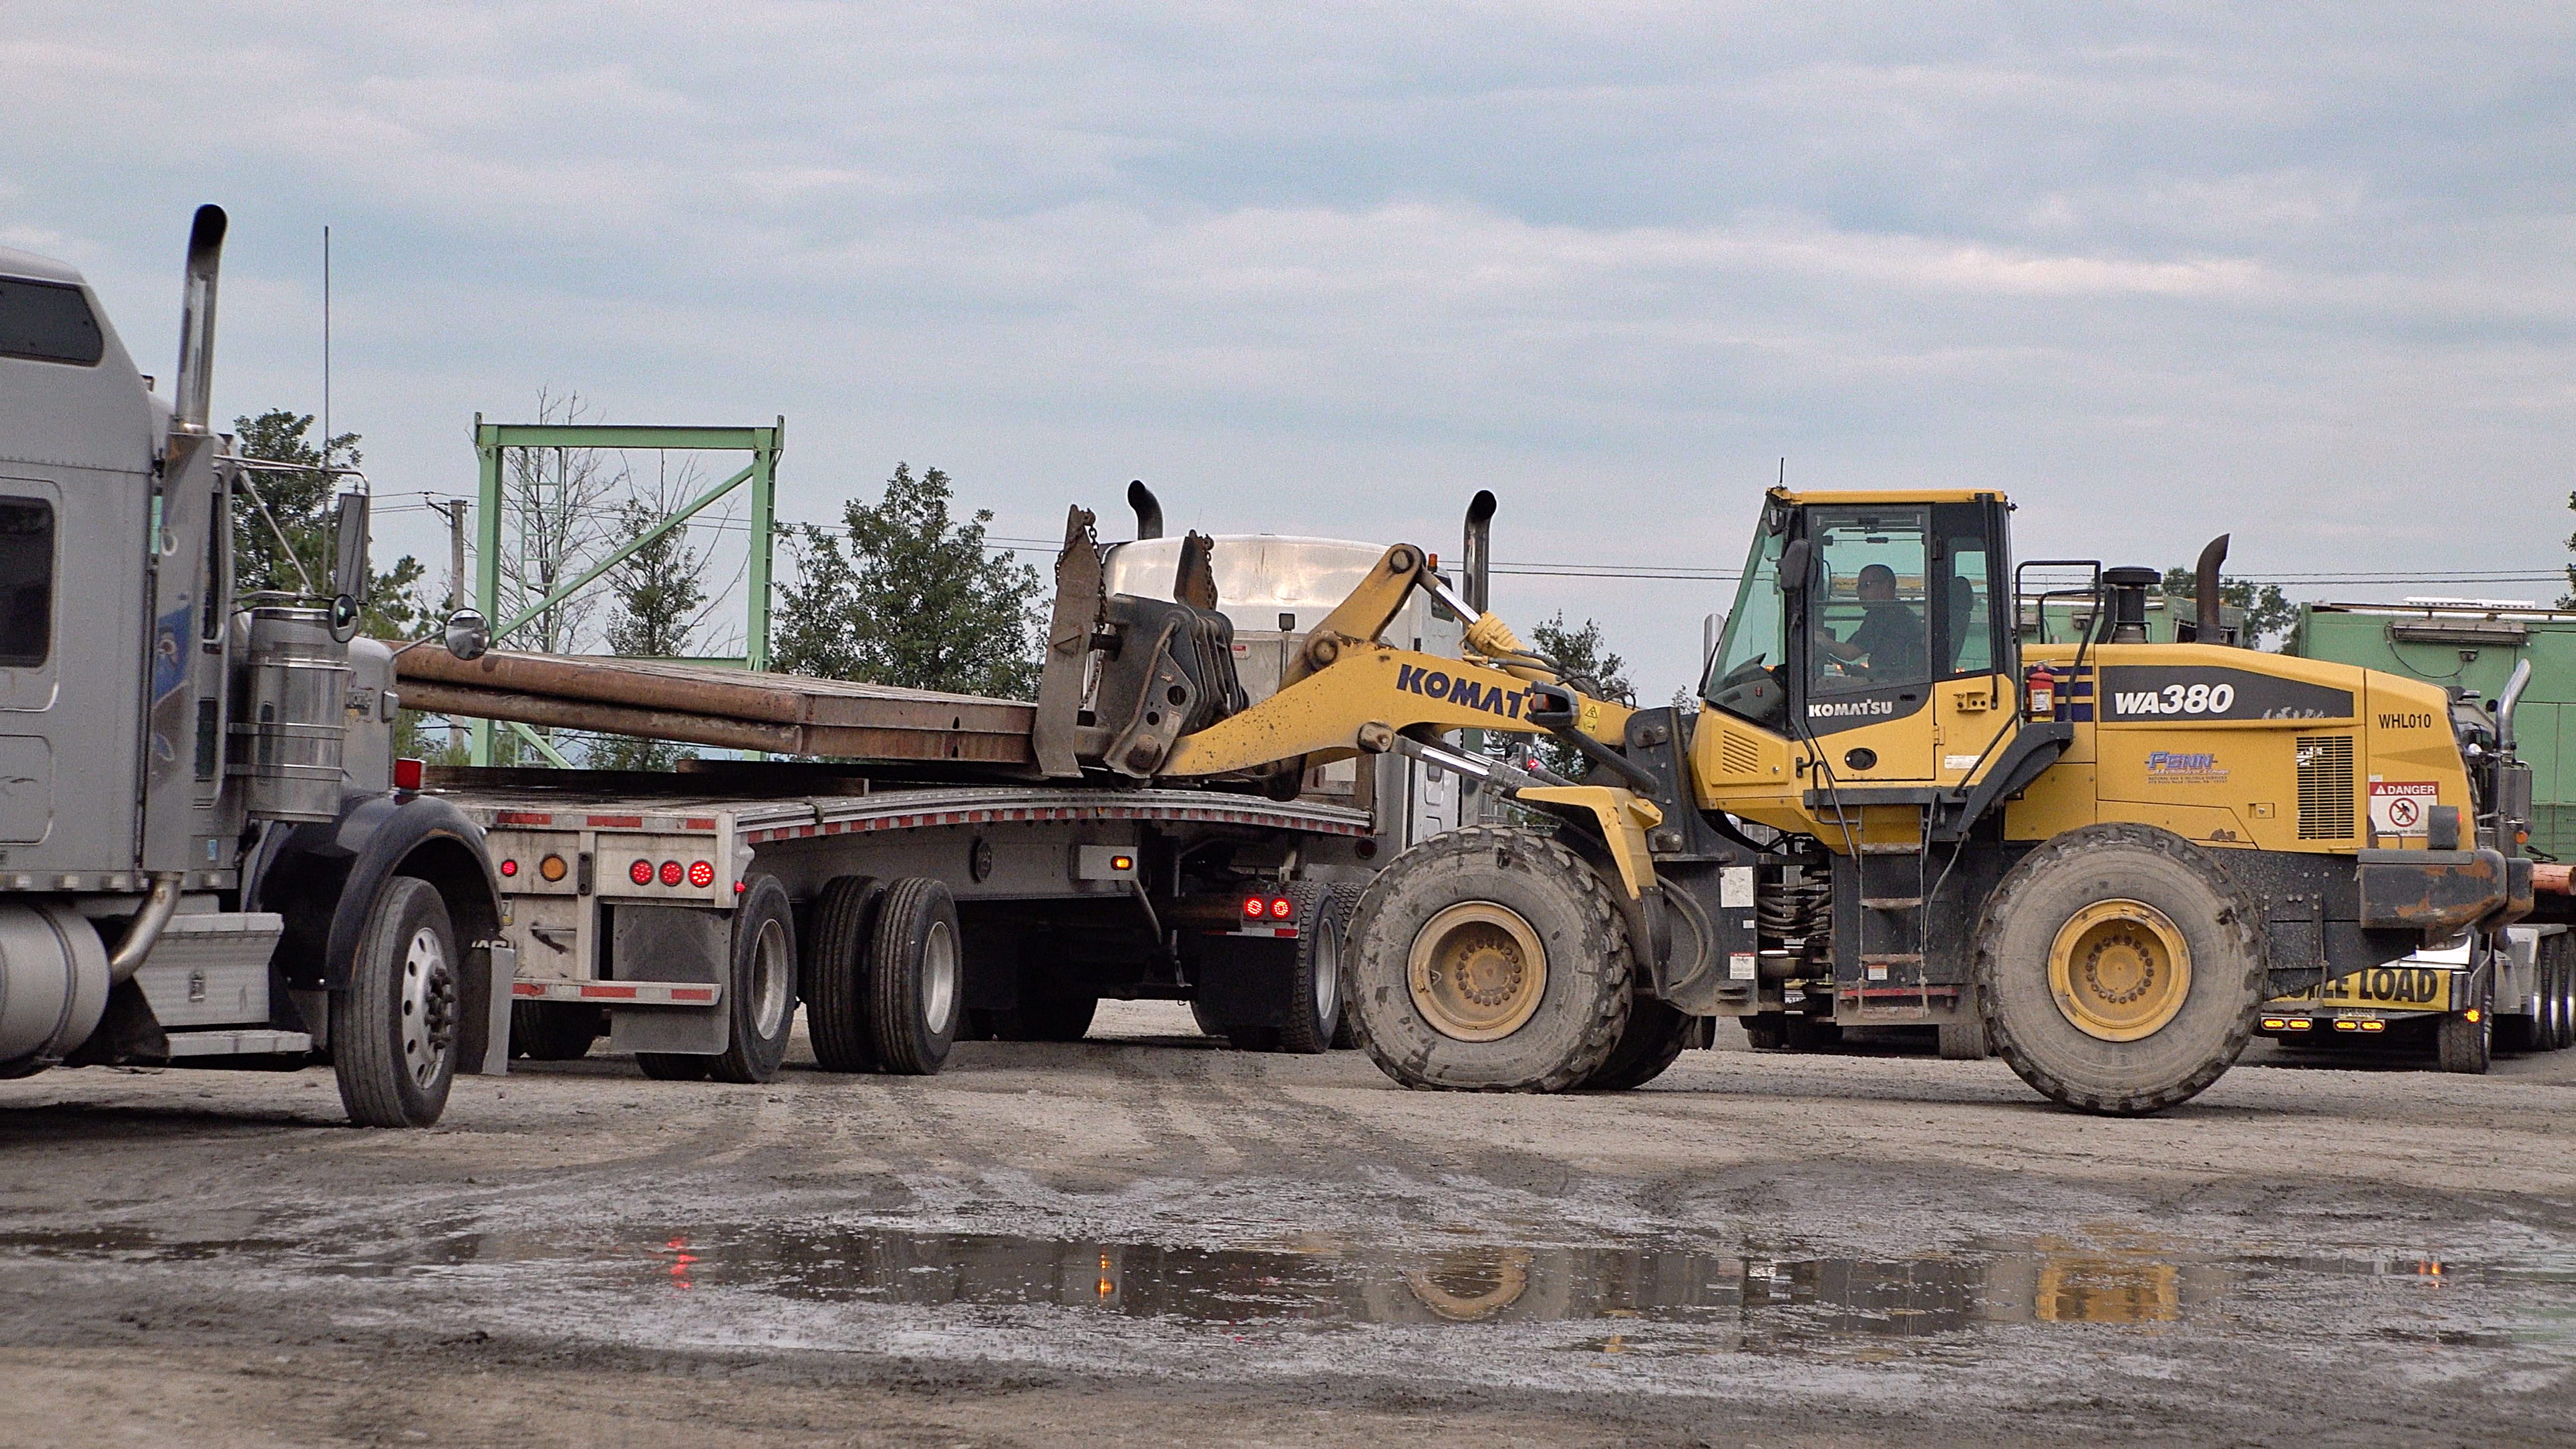 Heavy components are listed onto flatbed trucks for removal from the CUBO site.